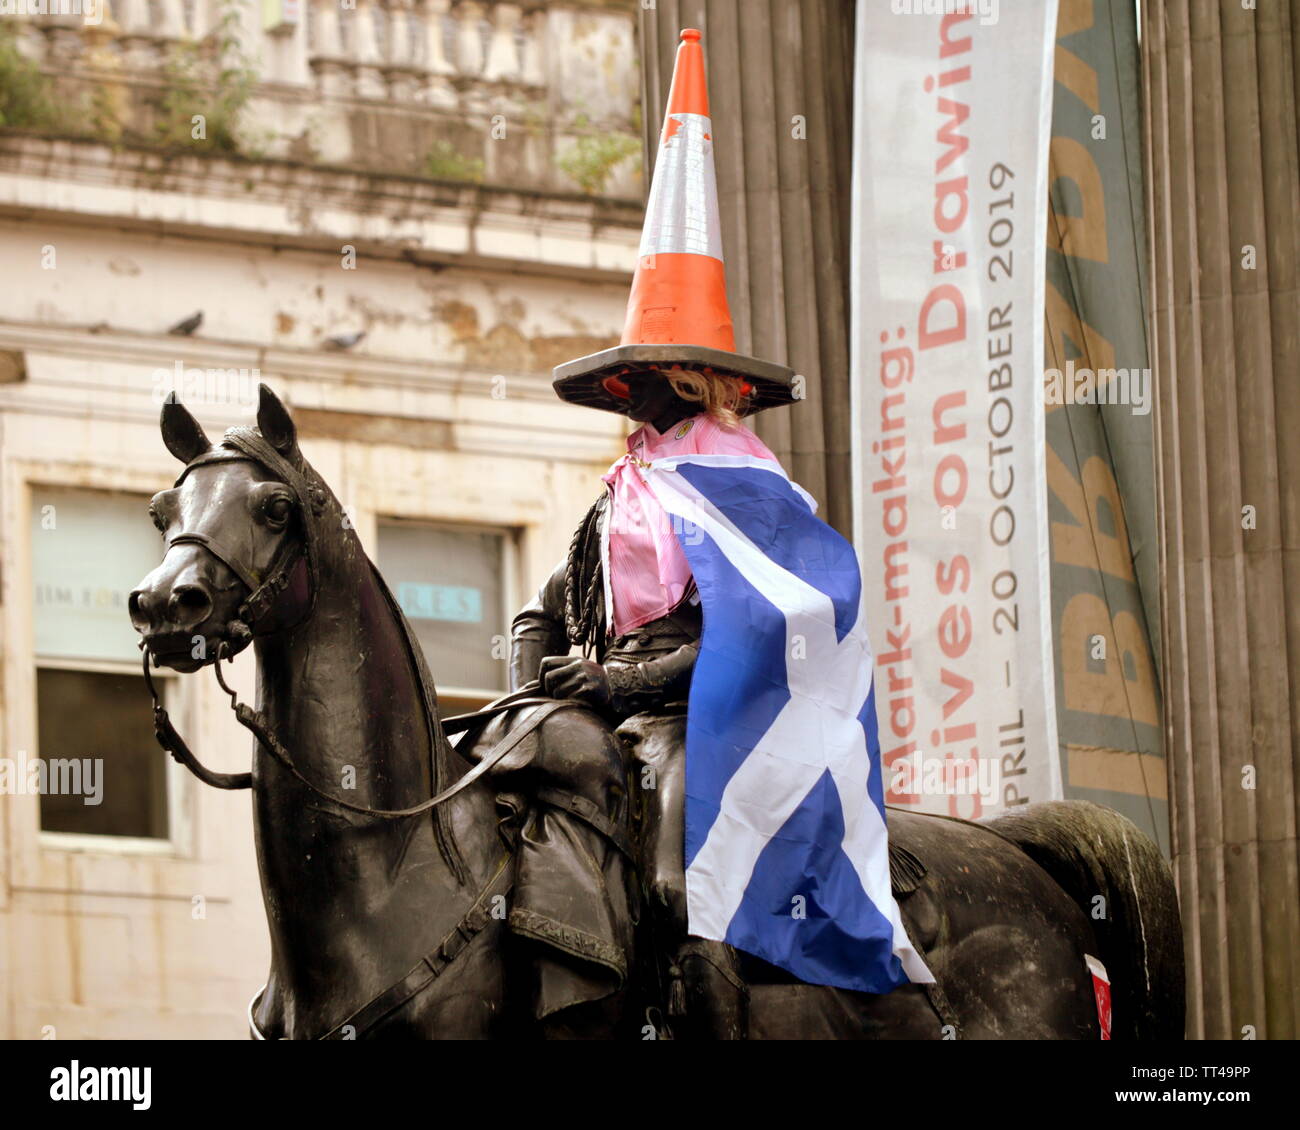 Glasgow, Scotland, UK  14th June, 2019.Woman's world cup Scotland play japan and in  the city with an impromptu makeover of the iconic symbol of the city’s independent nature the cone headed man. The duke of Wellington statue outside the modern art museum, the goma, was given a blonde wig and a pink team top with a placard voicing support for the Scottish woman's team, “C’mon  Scotland” our girls our game”who play England on Sunday. Credit: Gerard Ferry/ Alamy Live News Stock Photo